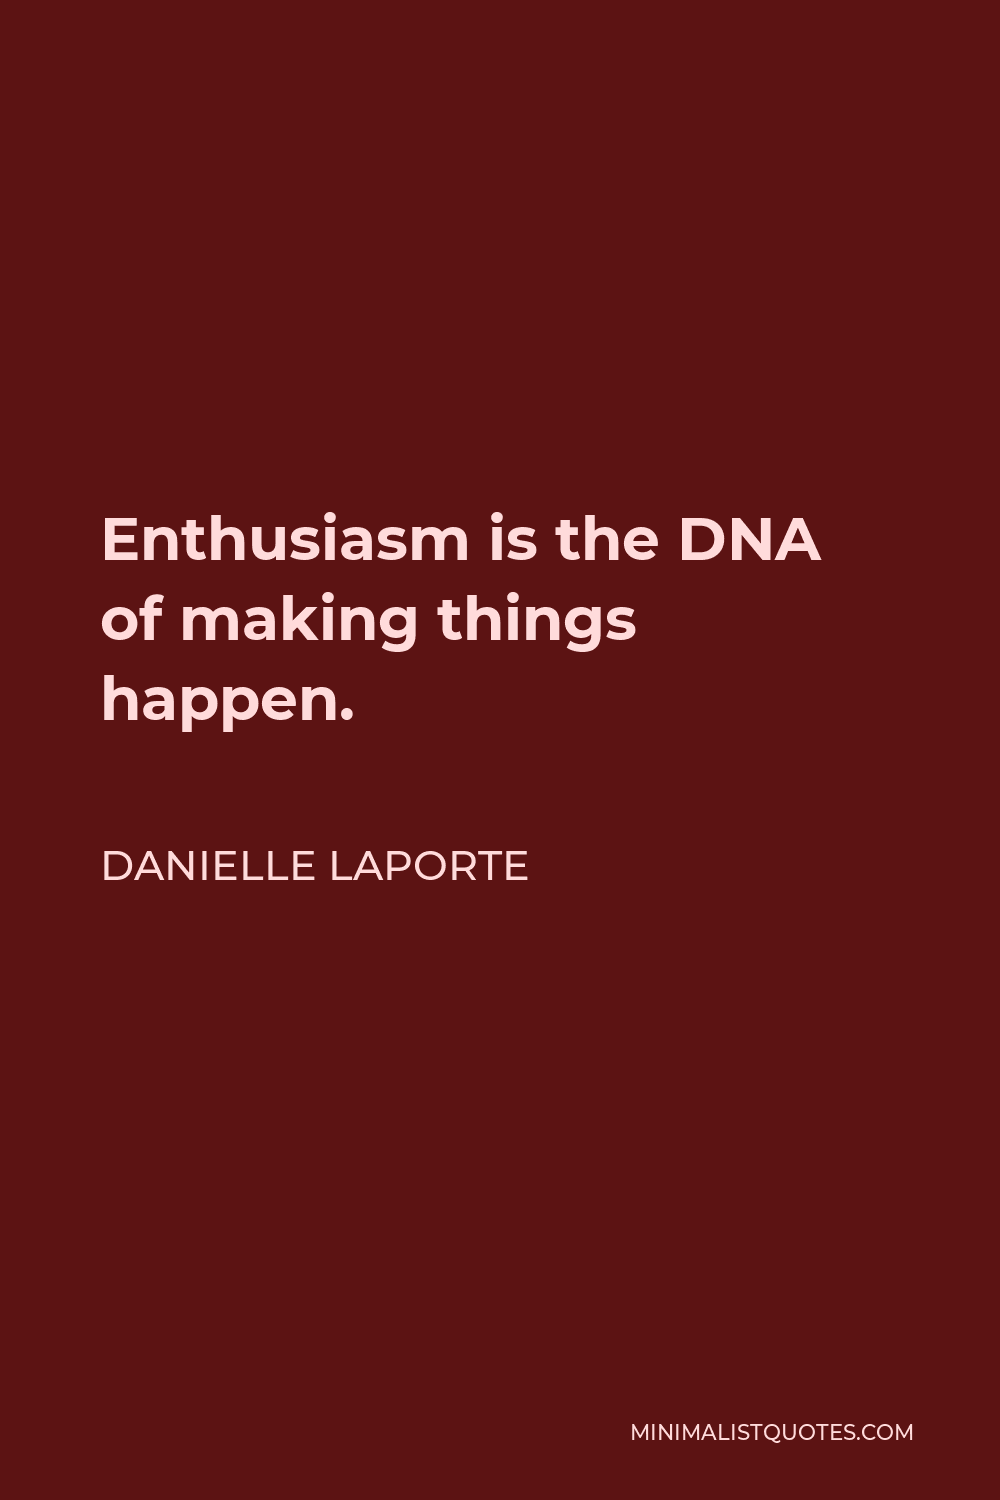 Danielle LaPorte Quote - Enthusiasm is the DNA of making things happen.